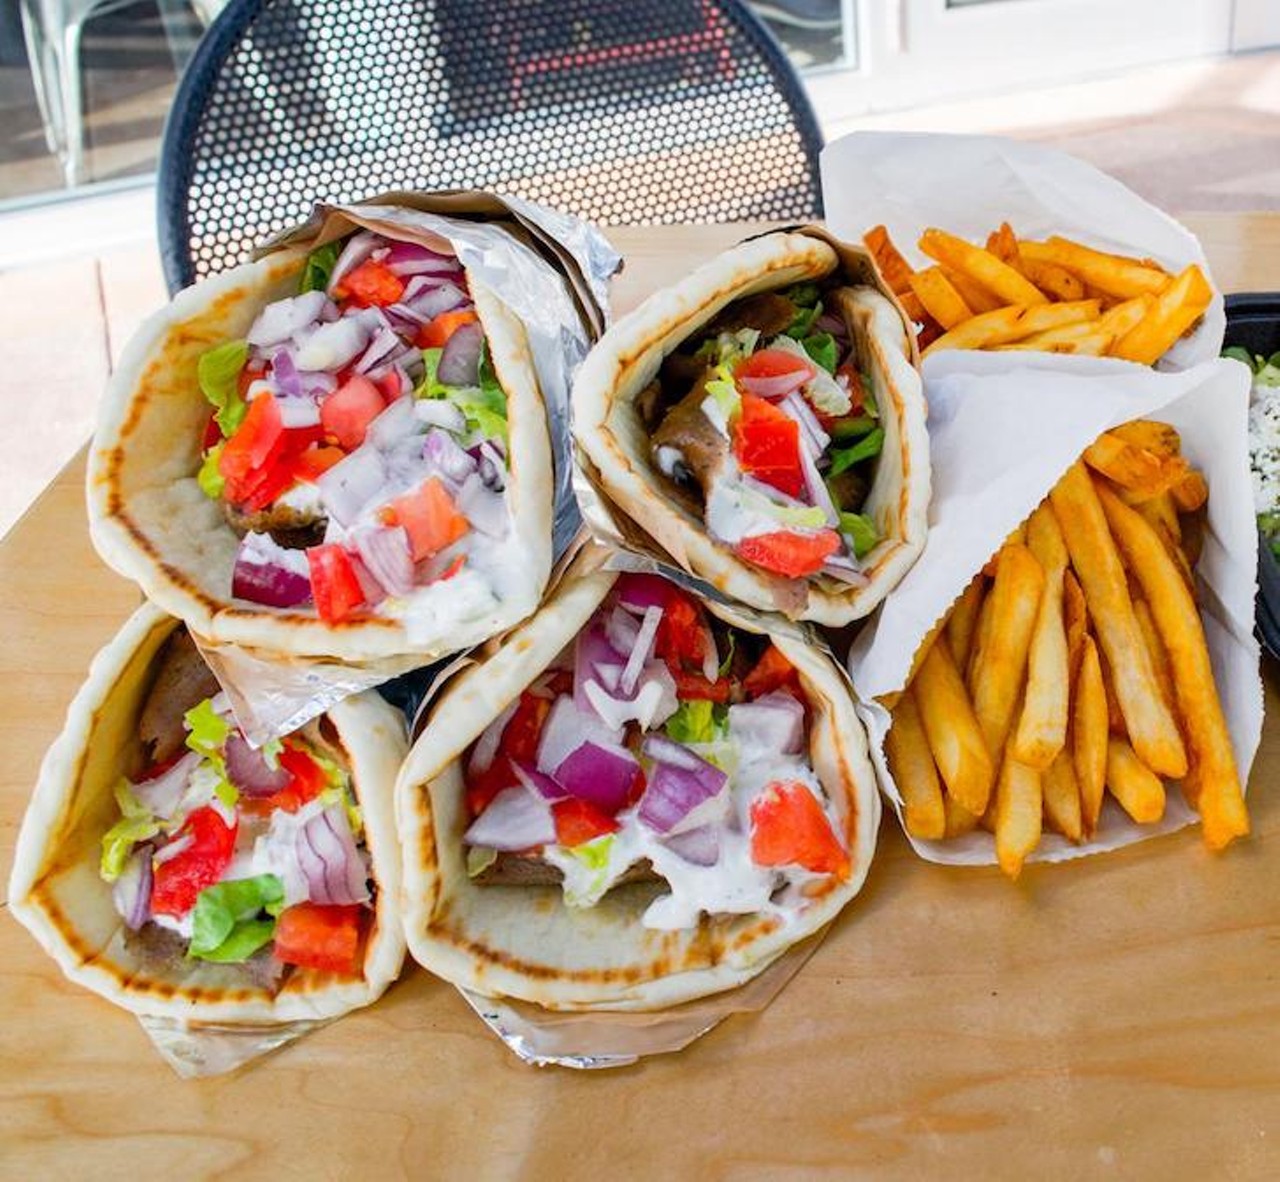 Gyroville  
10360 E. Colonial Drive, 407-978-8191
The South Florida chain brings its build-your-own-gyro concept to the Reedy Plaza in east Orlando. Wraps, rice bowls and salads can be customized with gyro meat, pork or chicken souvlaki, or falafel. 
Photo via Gyroville/Facebook